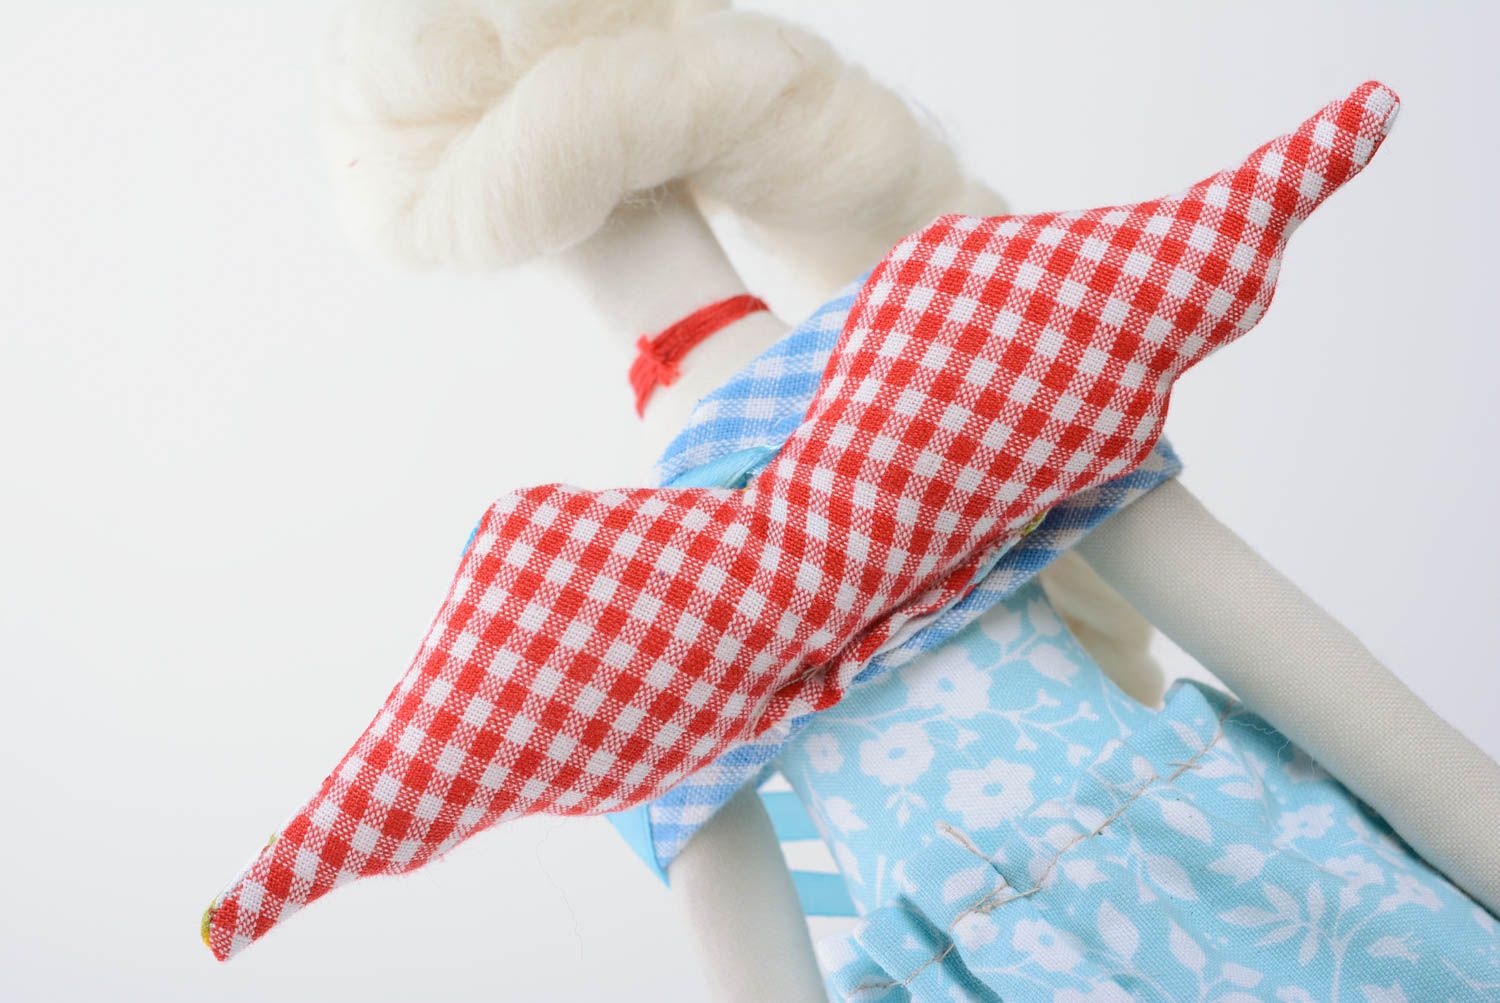 Fabric doll with long hair in blue dress handmade decorative toy gift for baby photo 4